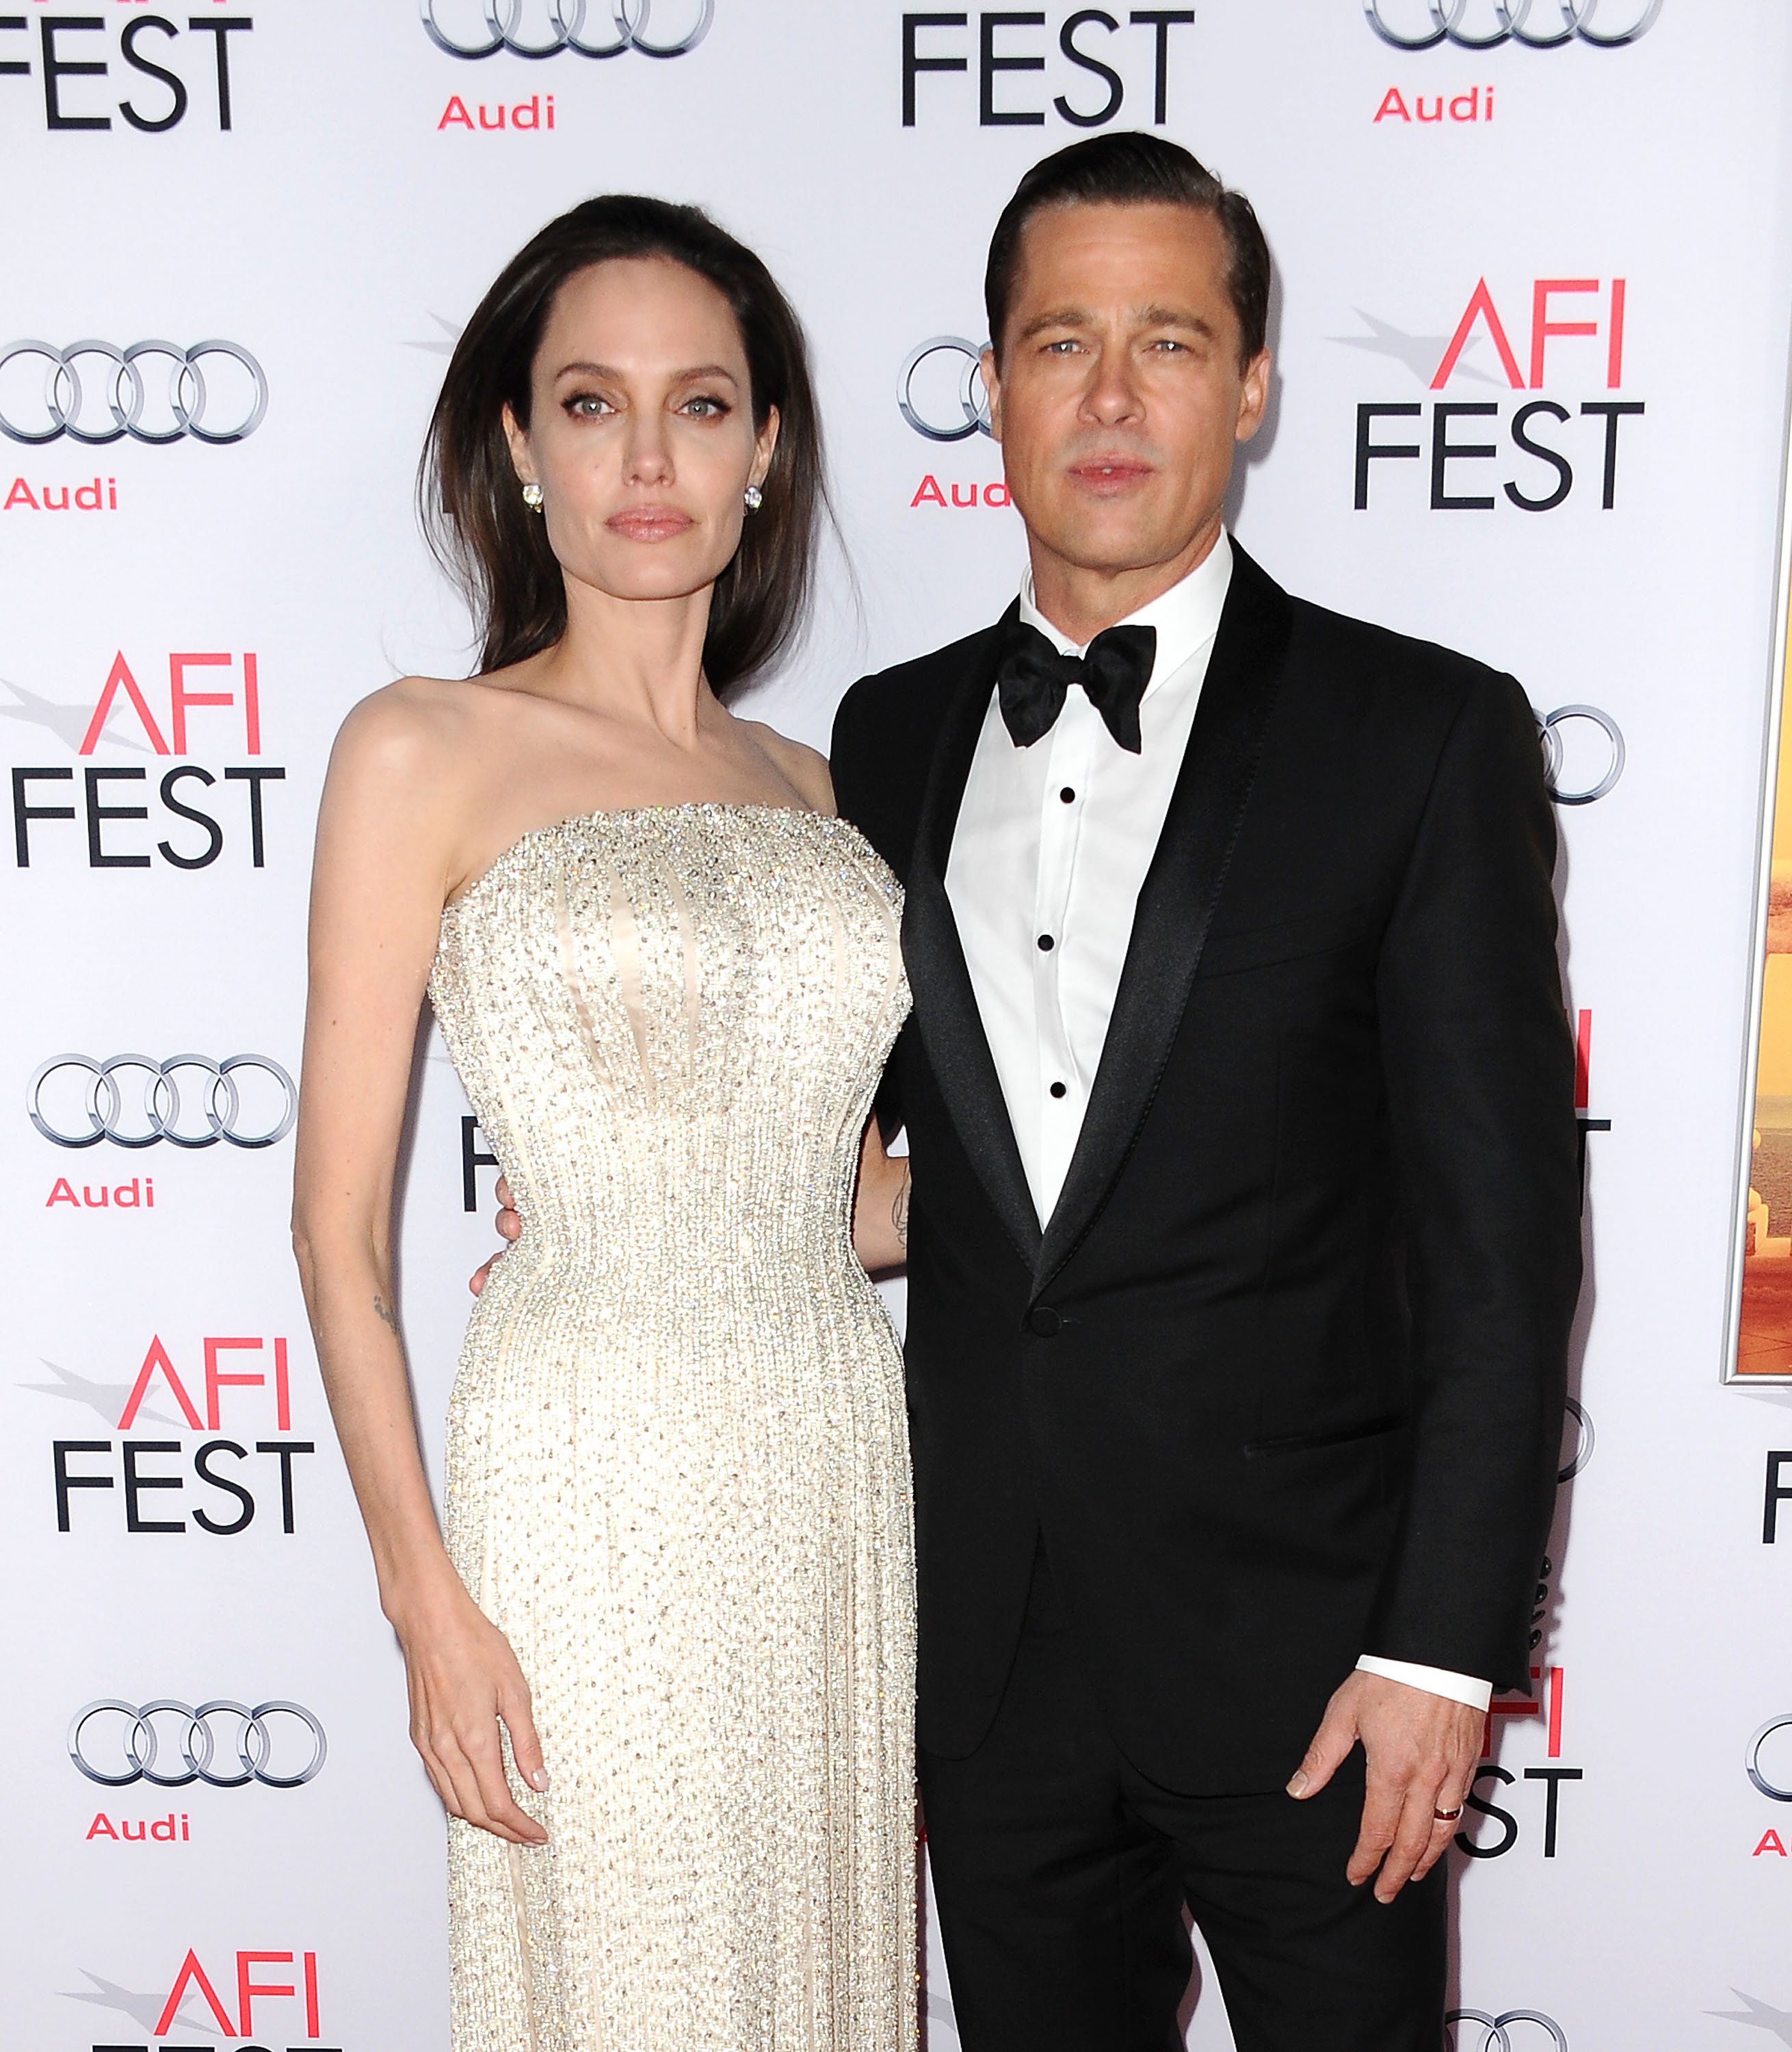 Angelina Jolie and Brad Pitt attend the premiere of "By the Sea" at the 2015 AFI Fest at TCL Chinese 6 Theatres on November 5, 2015 in Hollywood, California. | Source: Getty Images